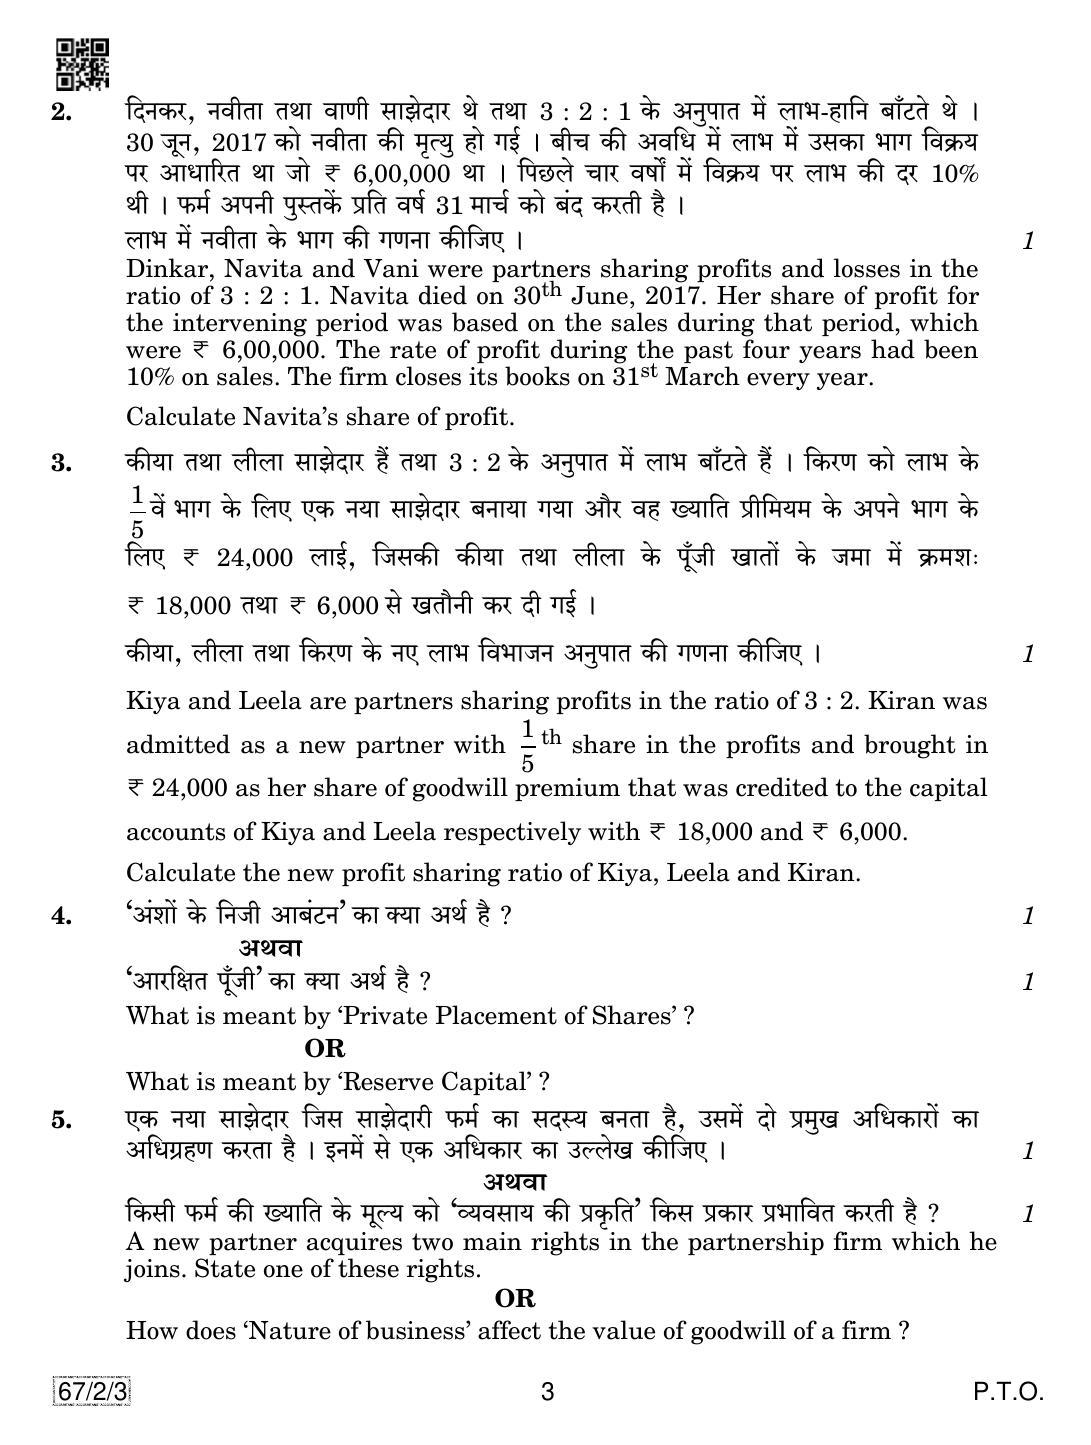 CBSE Class 12 67-2-3 Accountancy 2019 Question Paper - Page 3